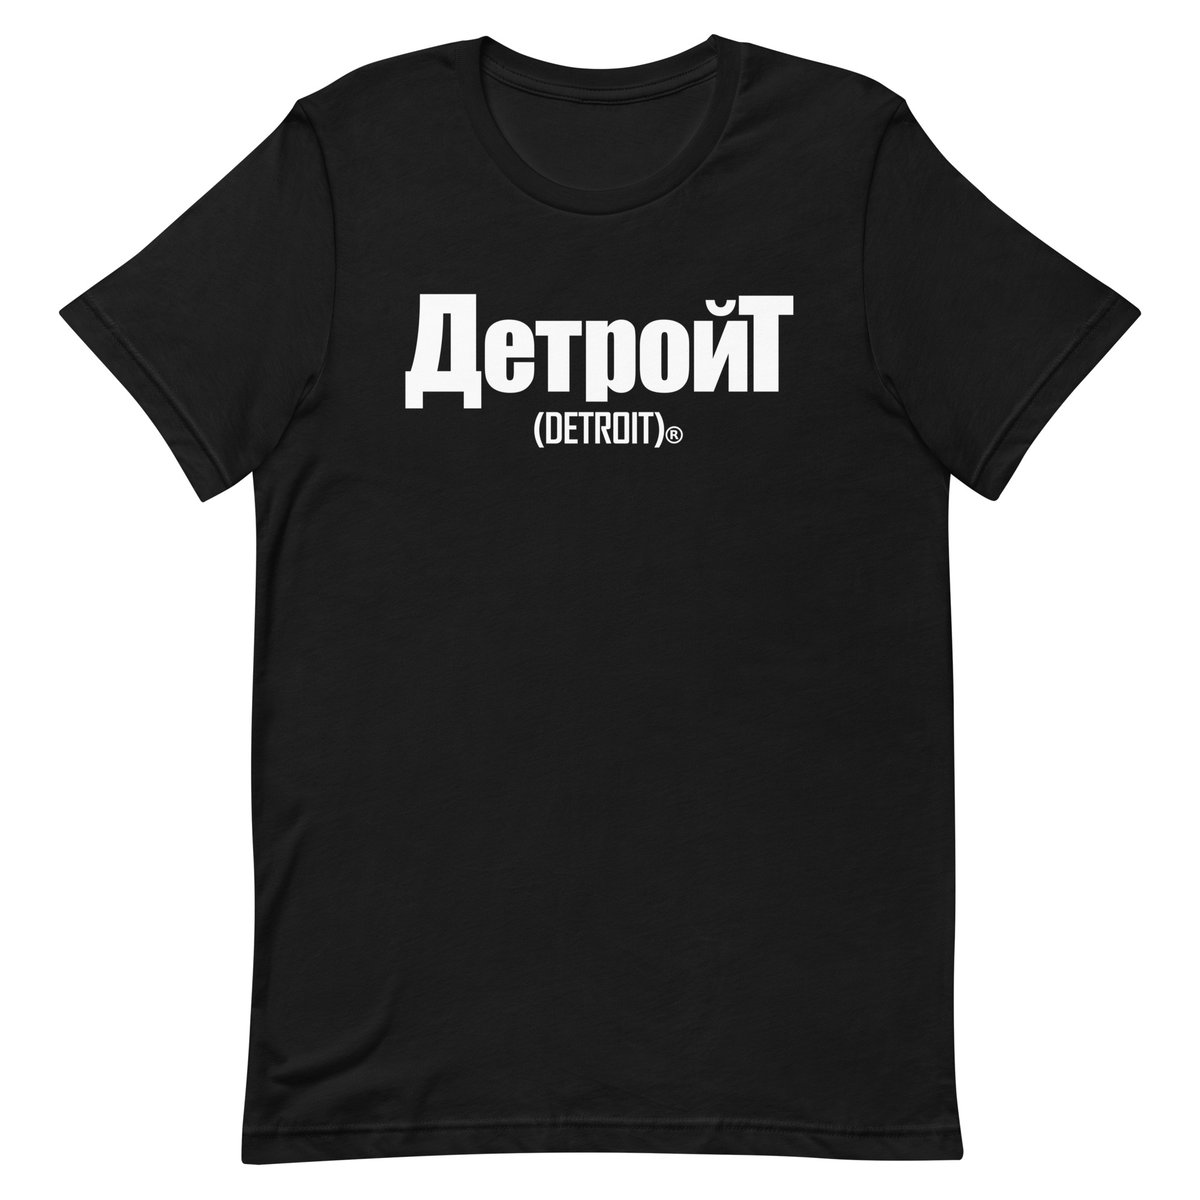 Image of Cyrillic Detroit Tee (Standard issue colors)